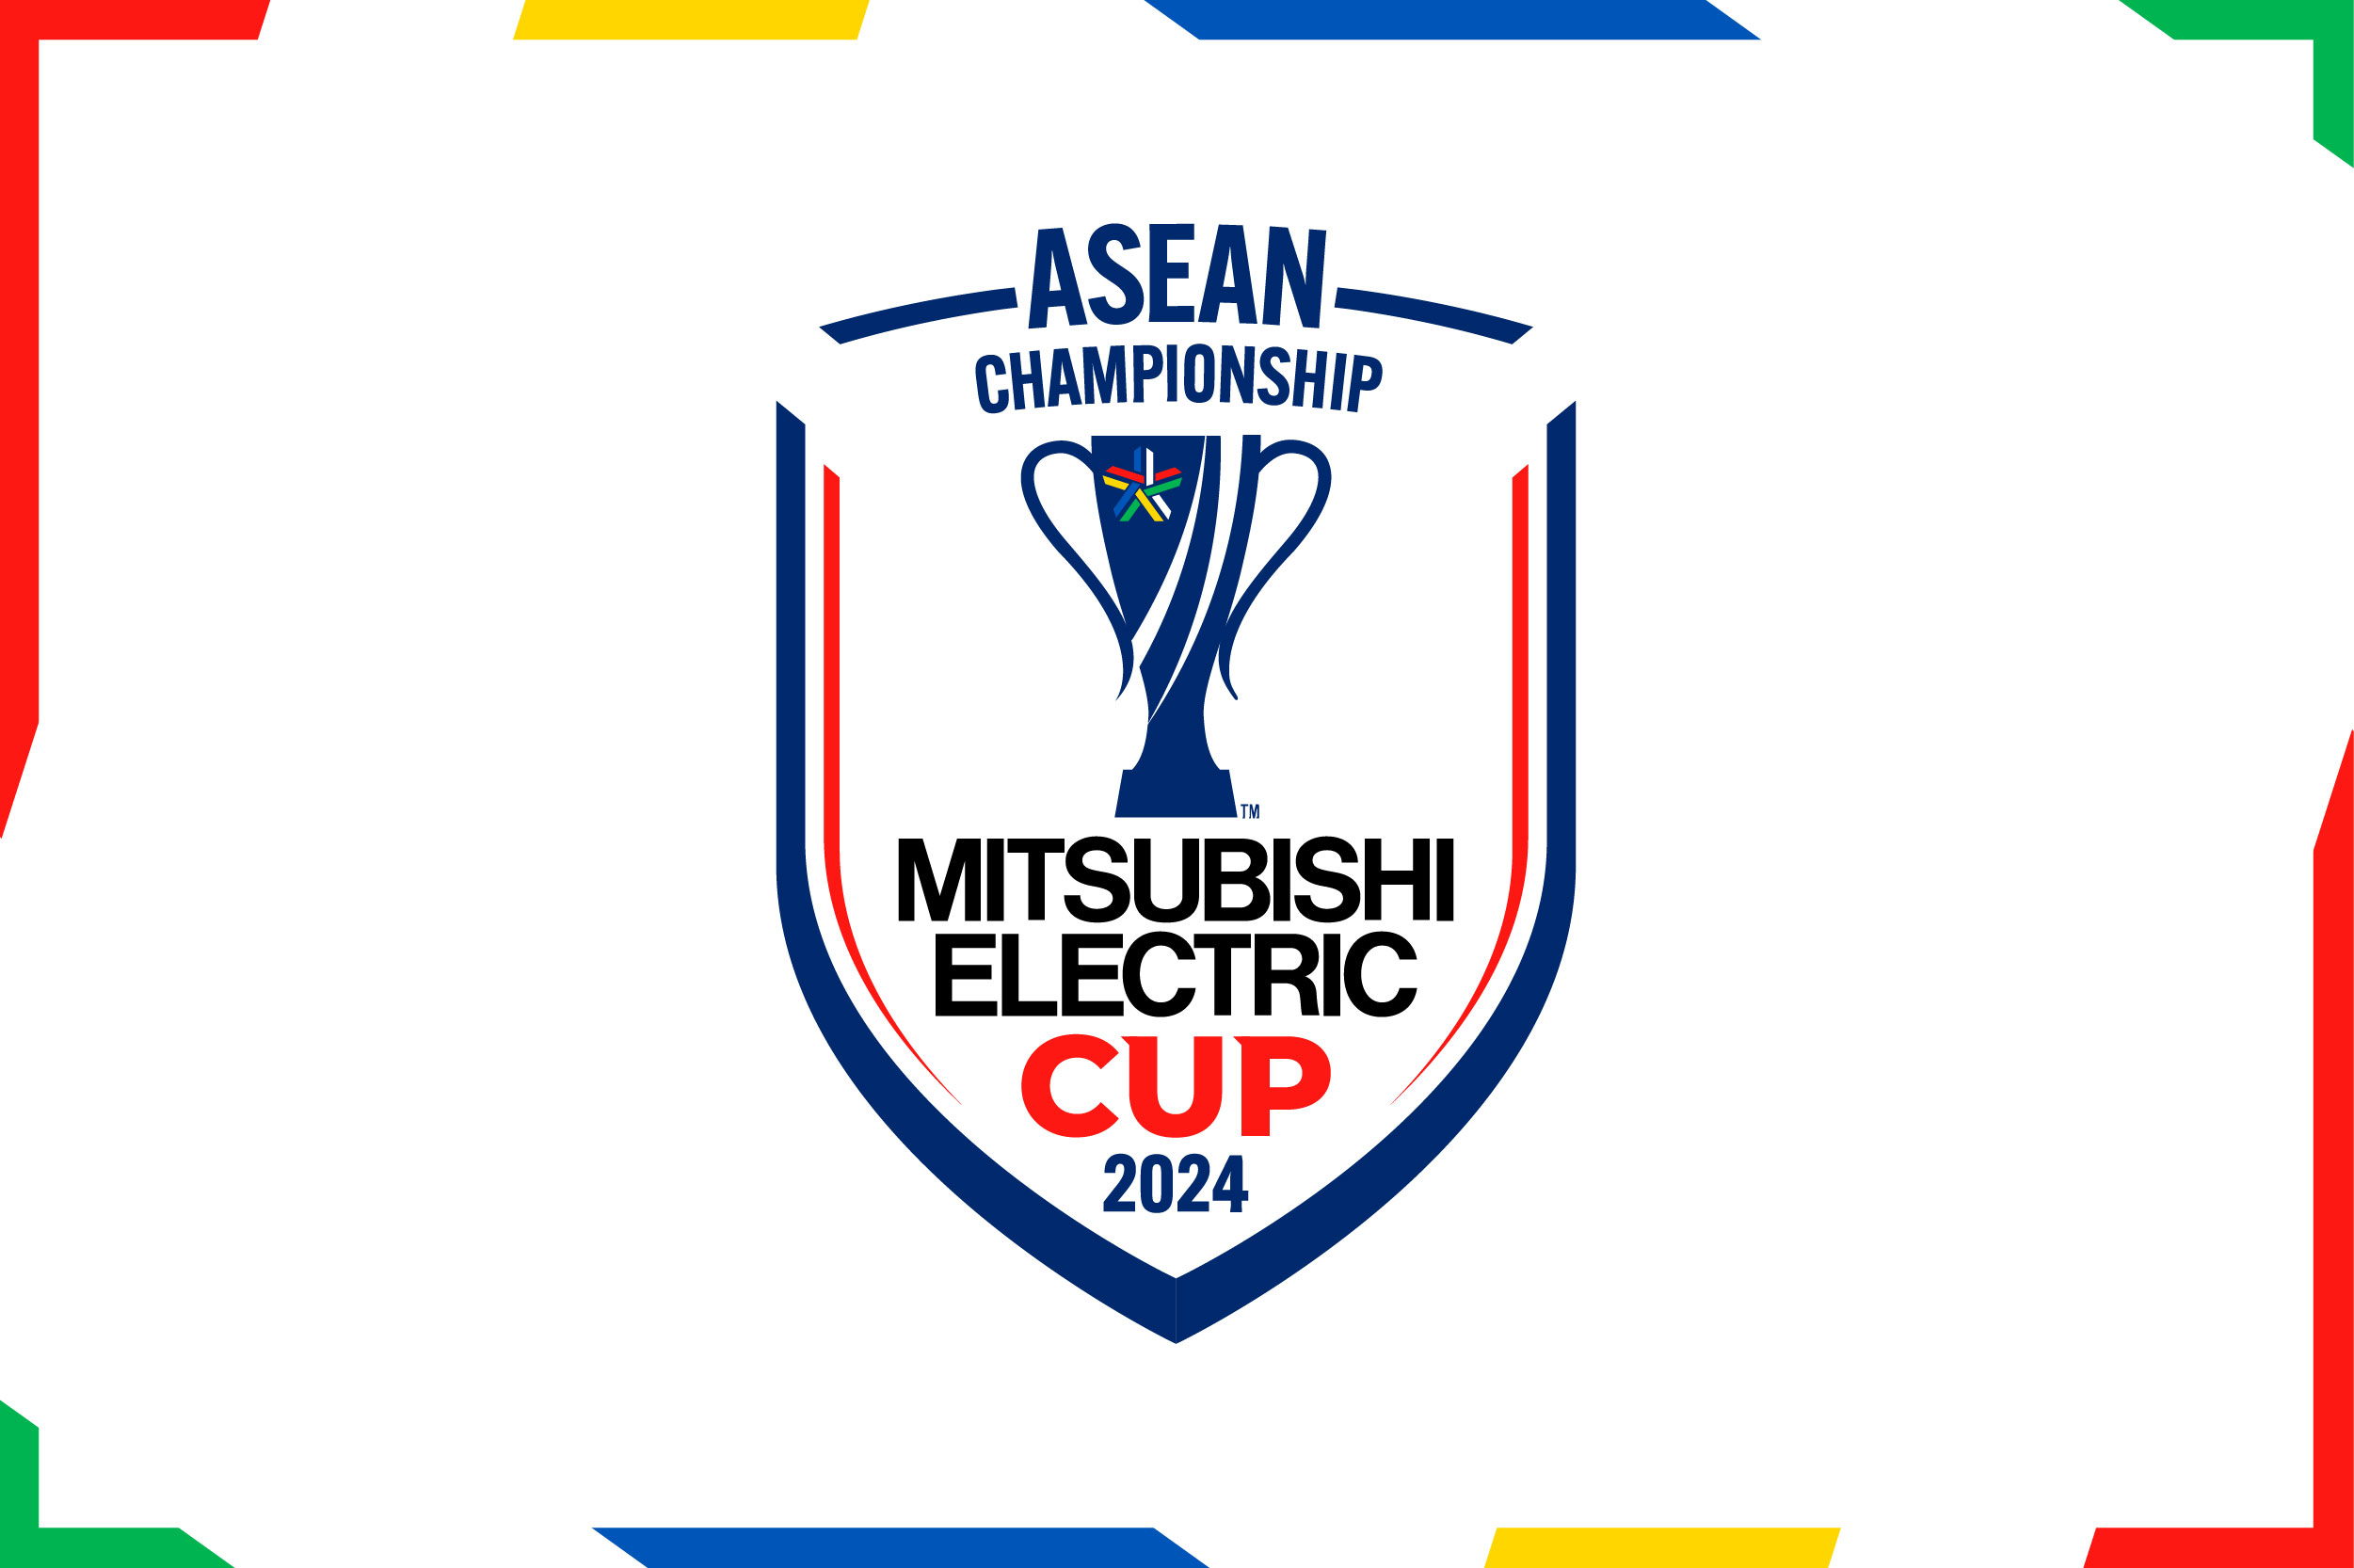 ASEAN FOOTBALL FEDERATION (AFF) AND MITSUBISHI ELECTRIC LAUNCH NEW BRAND IDENTITY FOR ASEAN MITSUBISHI ELECTRIC CUP™ 2024